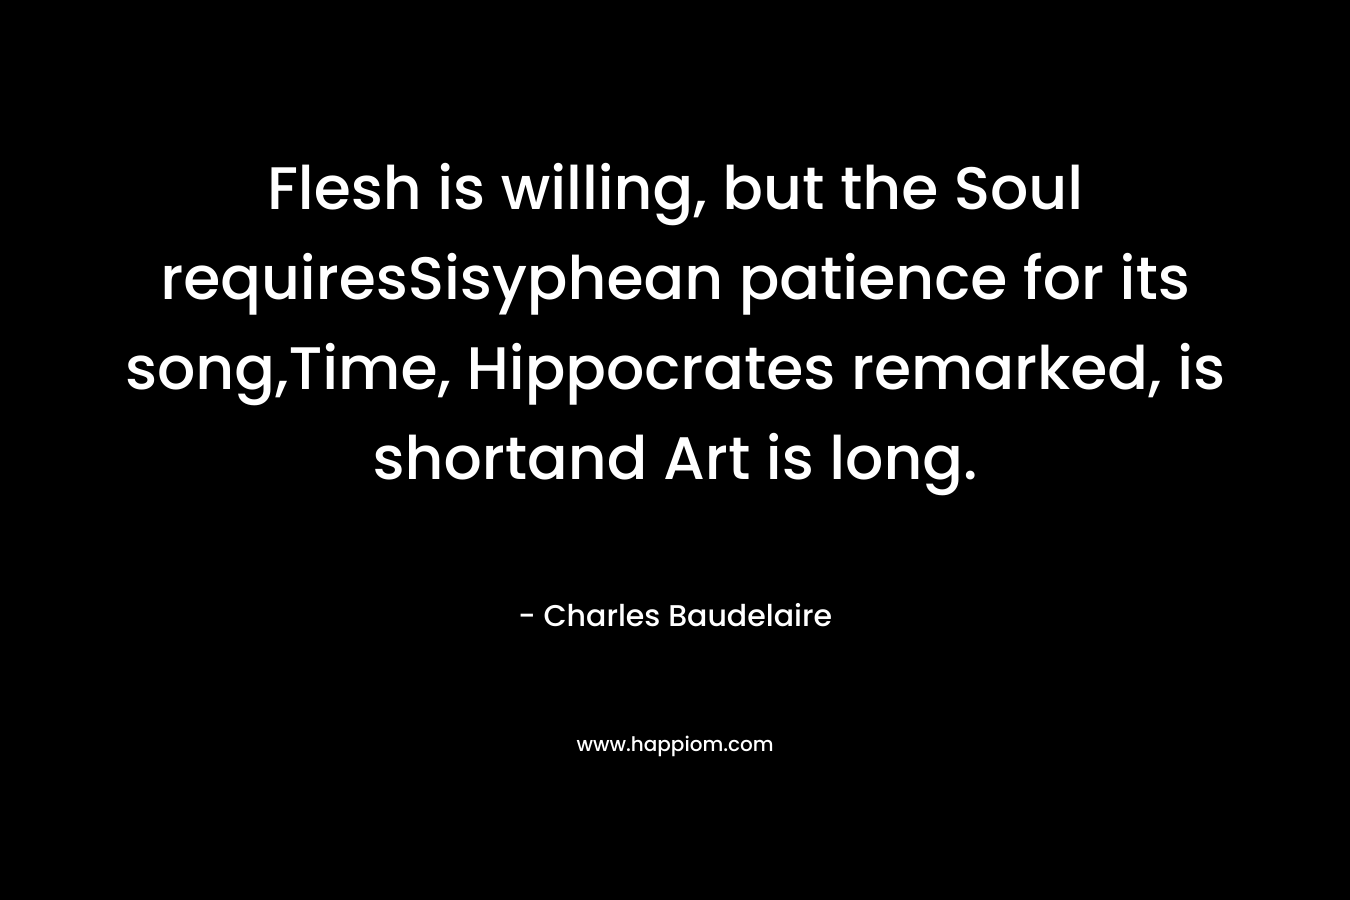 Flesh is willing, but the Soul requiresSisyphean patience for its song,Time, Hippocrates remarked, is shortand Art is long. – Charles Baudelaire